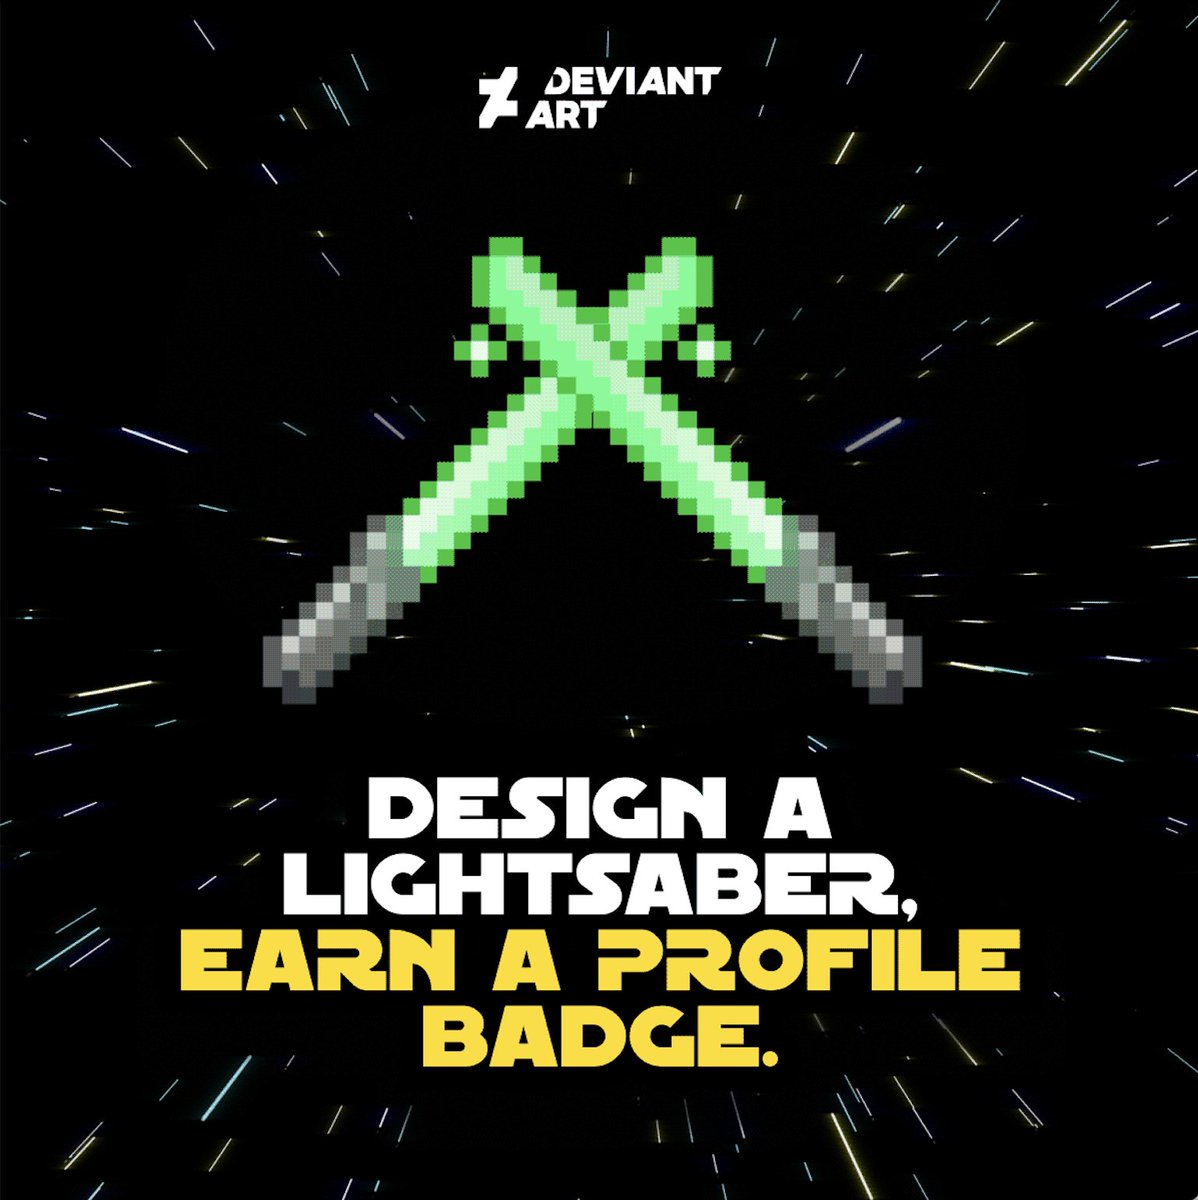 This May the 4th, get inspired by everyone's favorite glowing ancient weapon from a long time ago in a galaxy far, far away. Design a lightsaber in your style to earn a glowing Profile badge! bit.ly/3Up7f5J